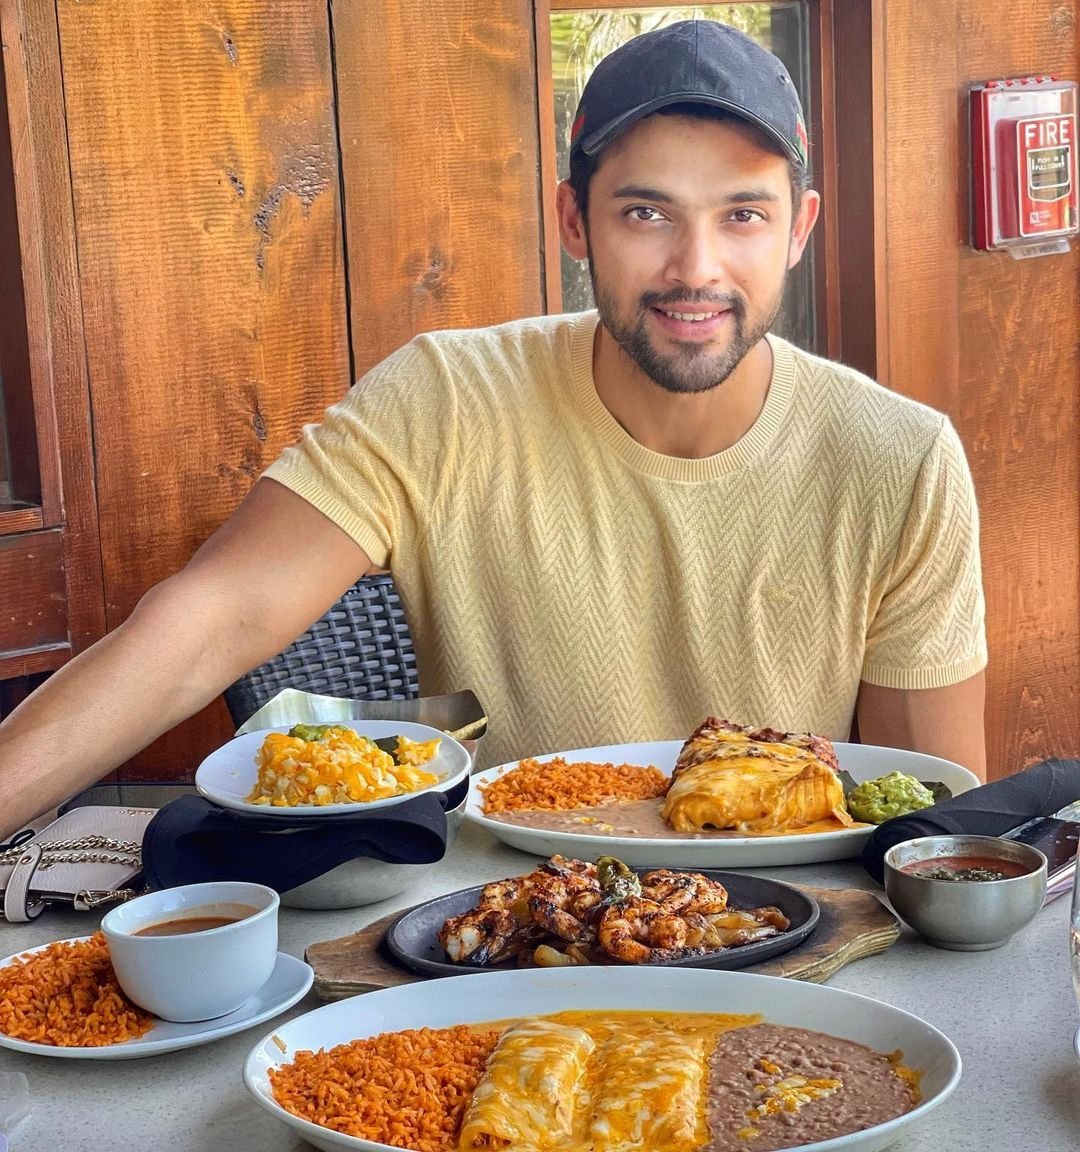 Me thinking of becoming a food blogger 😋👅 #mexicanfiesta #chimichangas #fooddiaries #nazarmatlagao 

~@LaghateParth on Instagram ♥️🔥

#ParthSamthaan